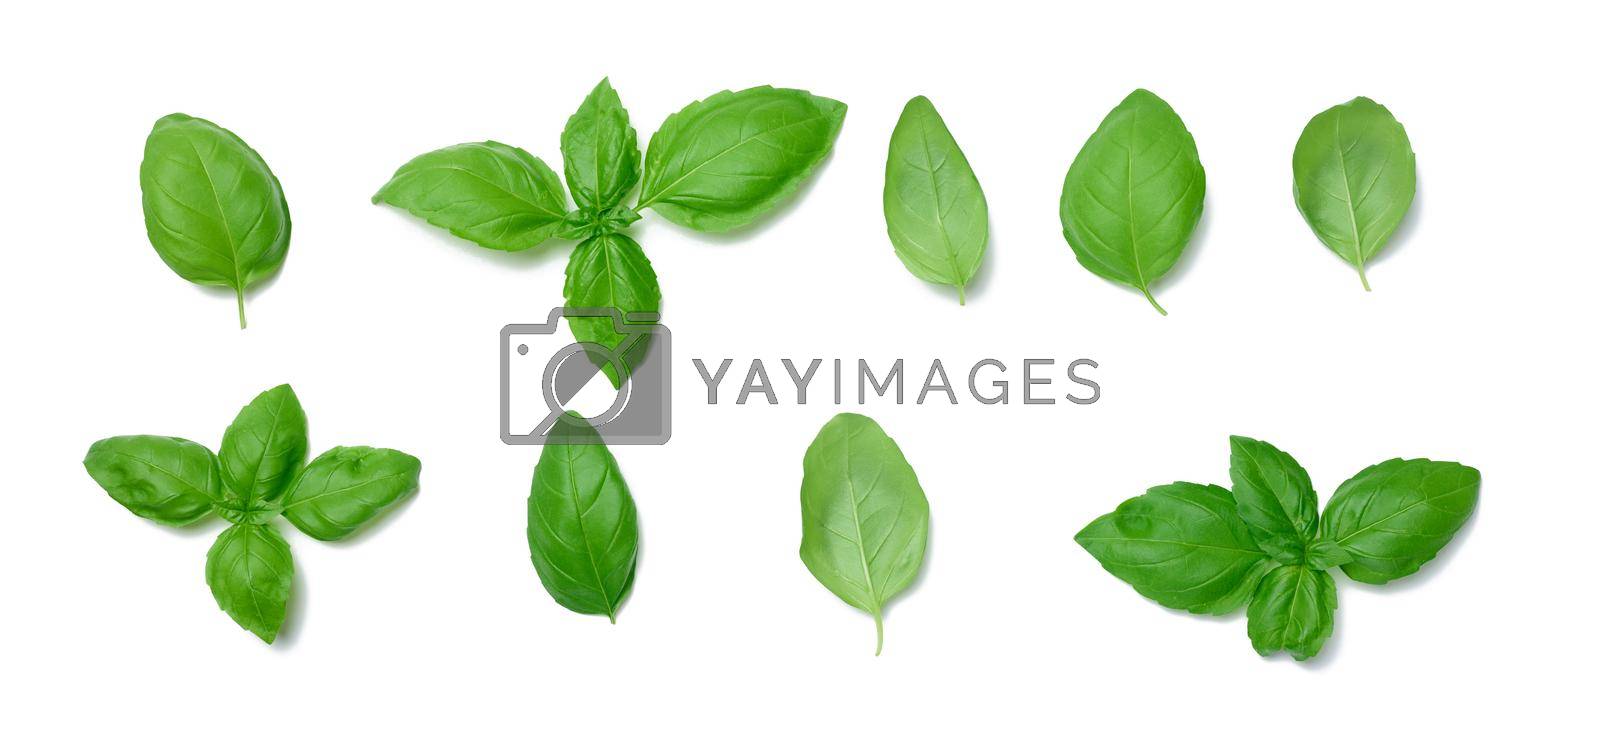 Royalty free image of Various green basil leaves isolated on white background by ndanko